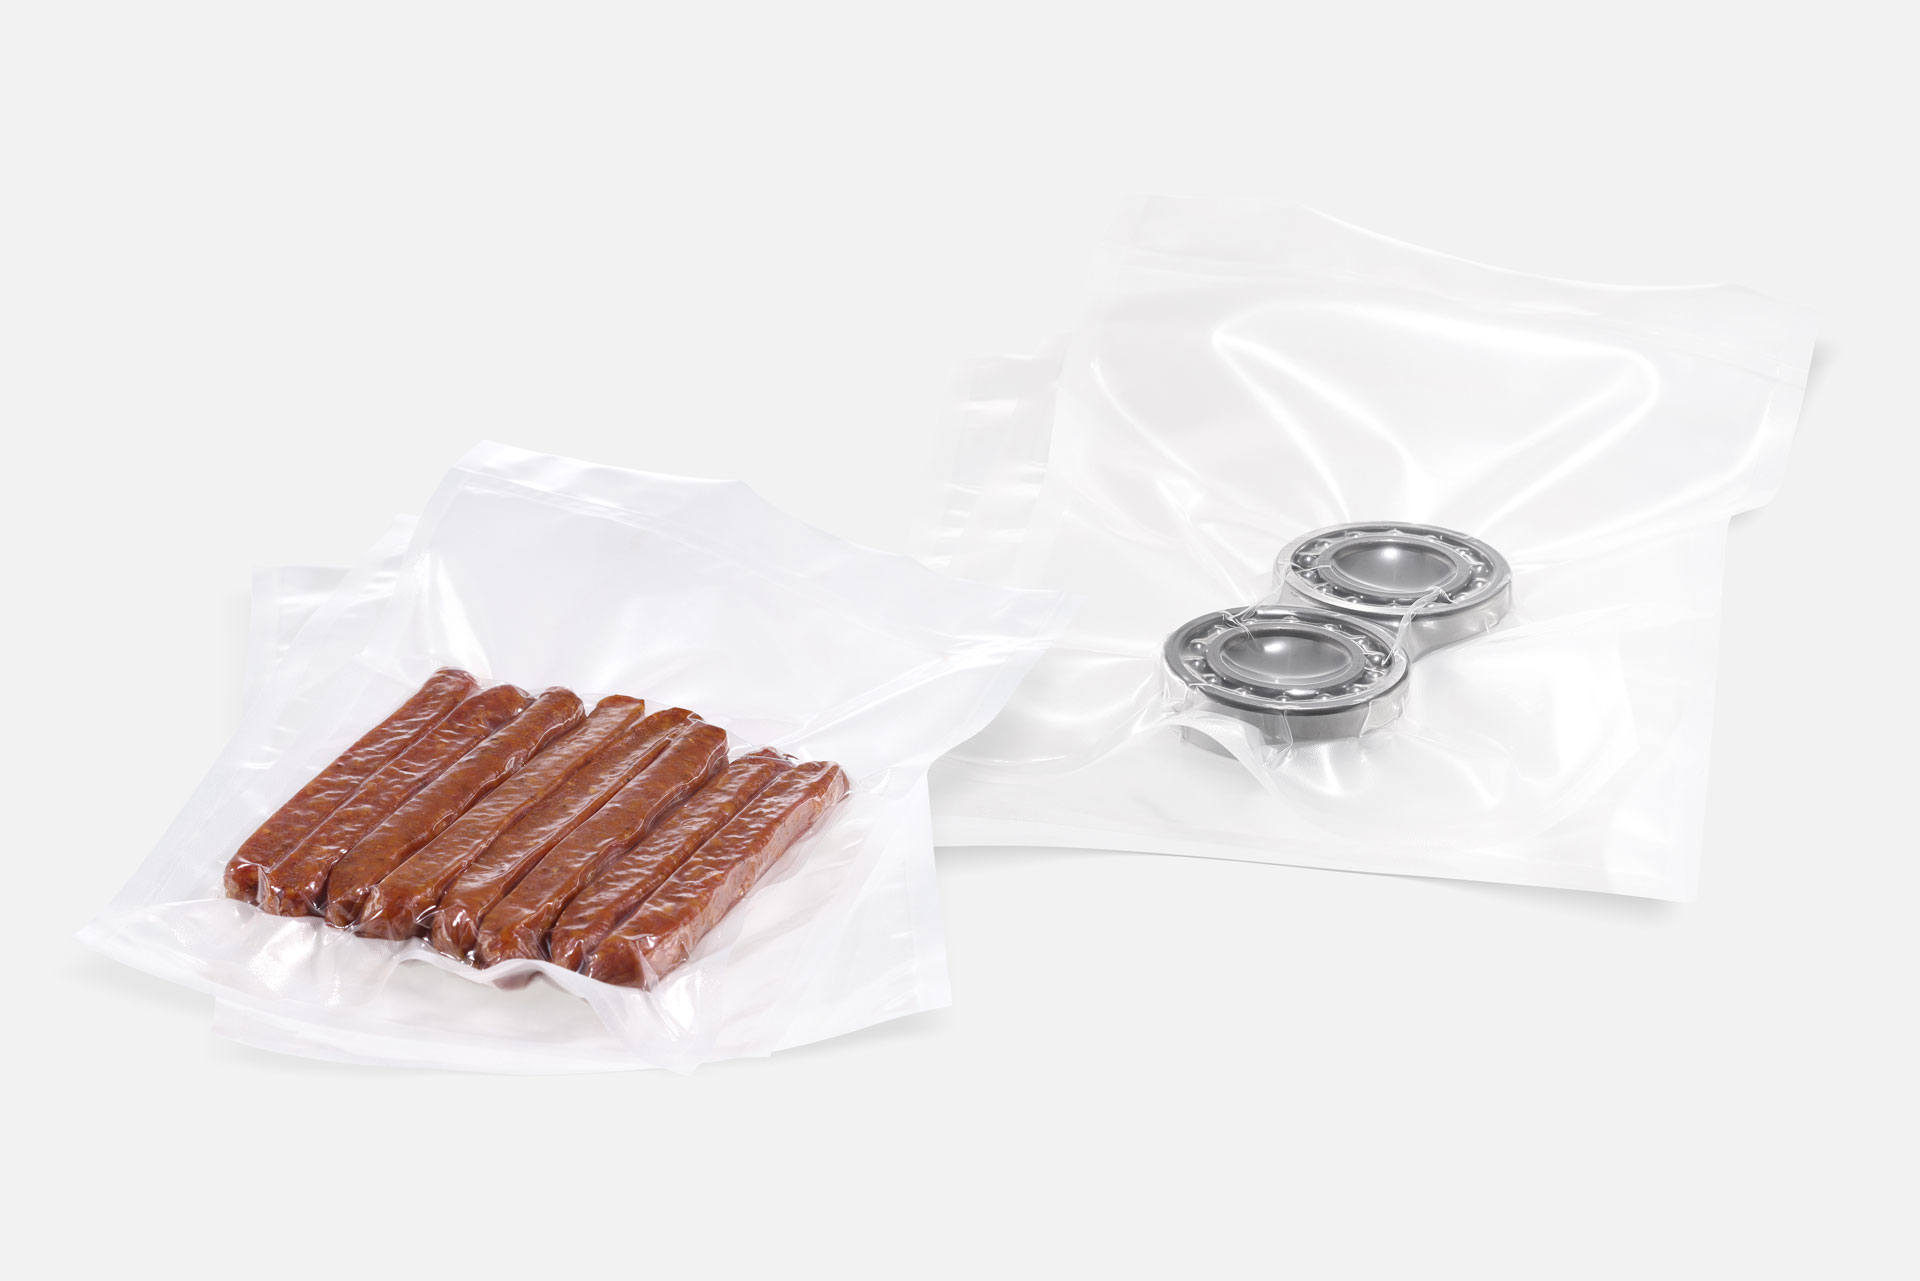 Two structured transparent vacuum bags vacuum-sealed with food and industrial parts